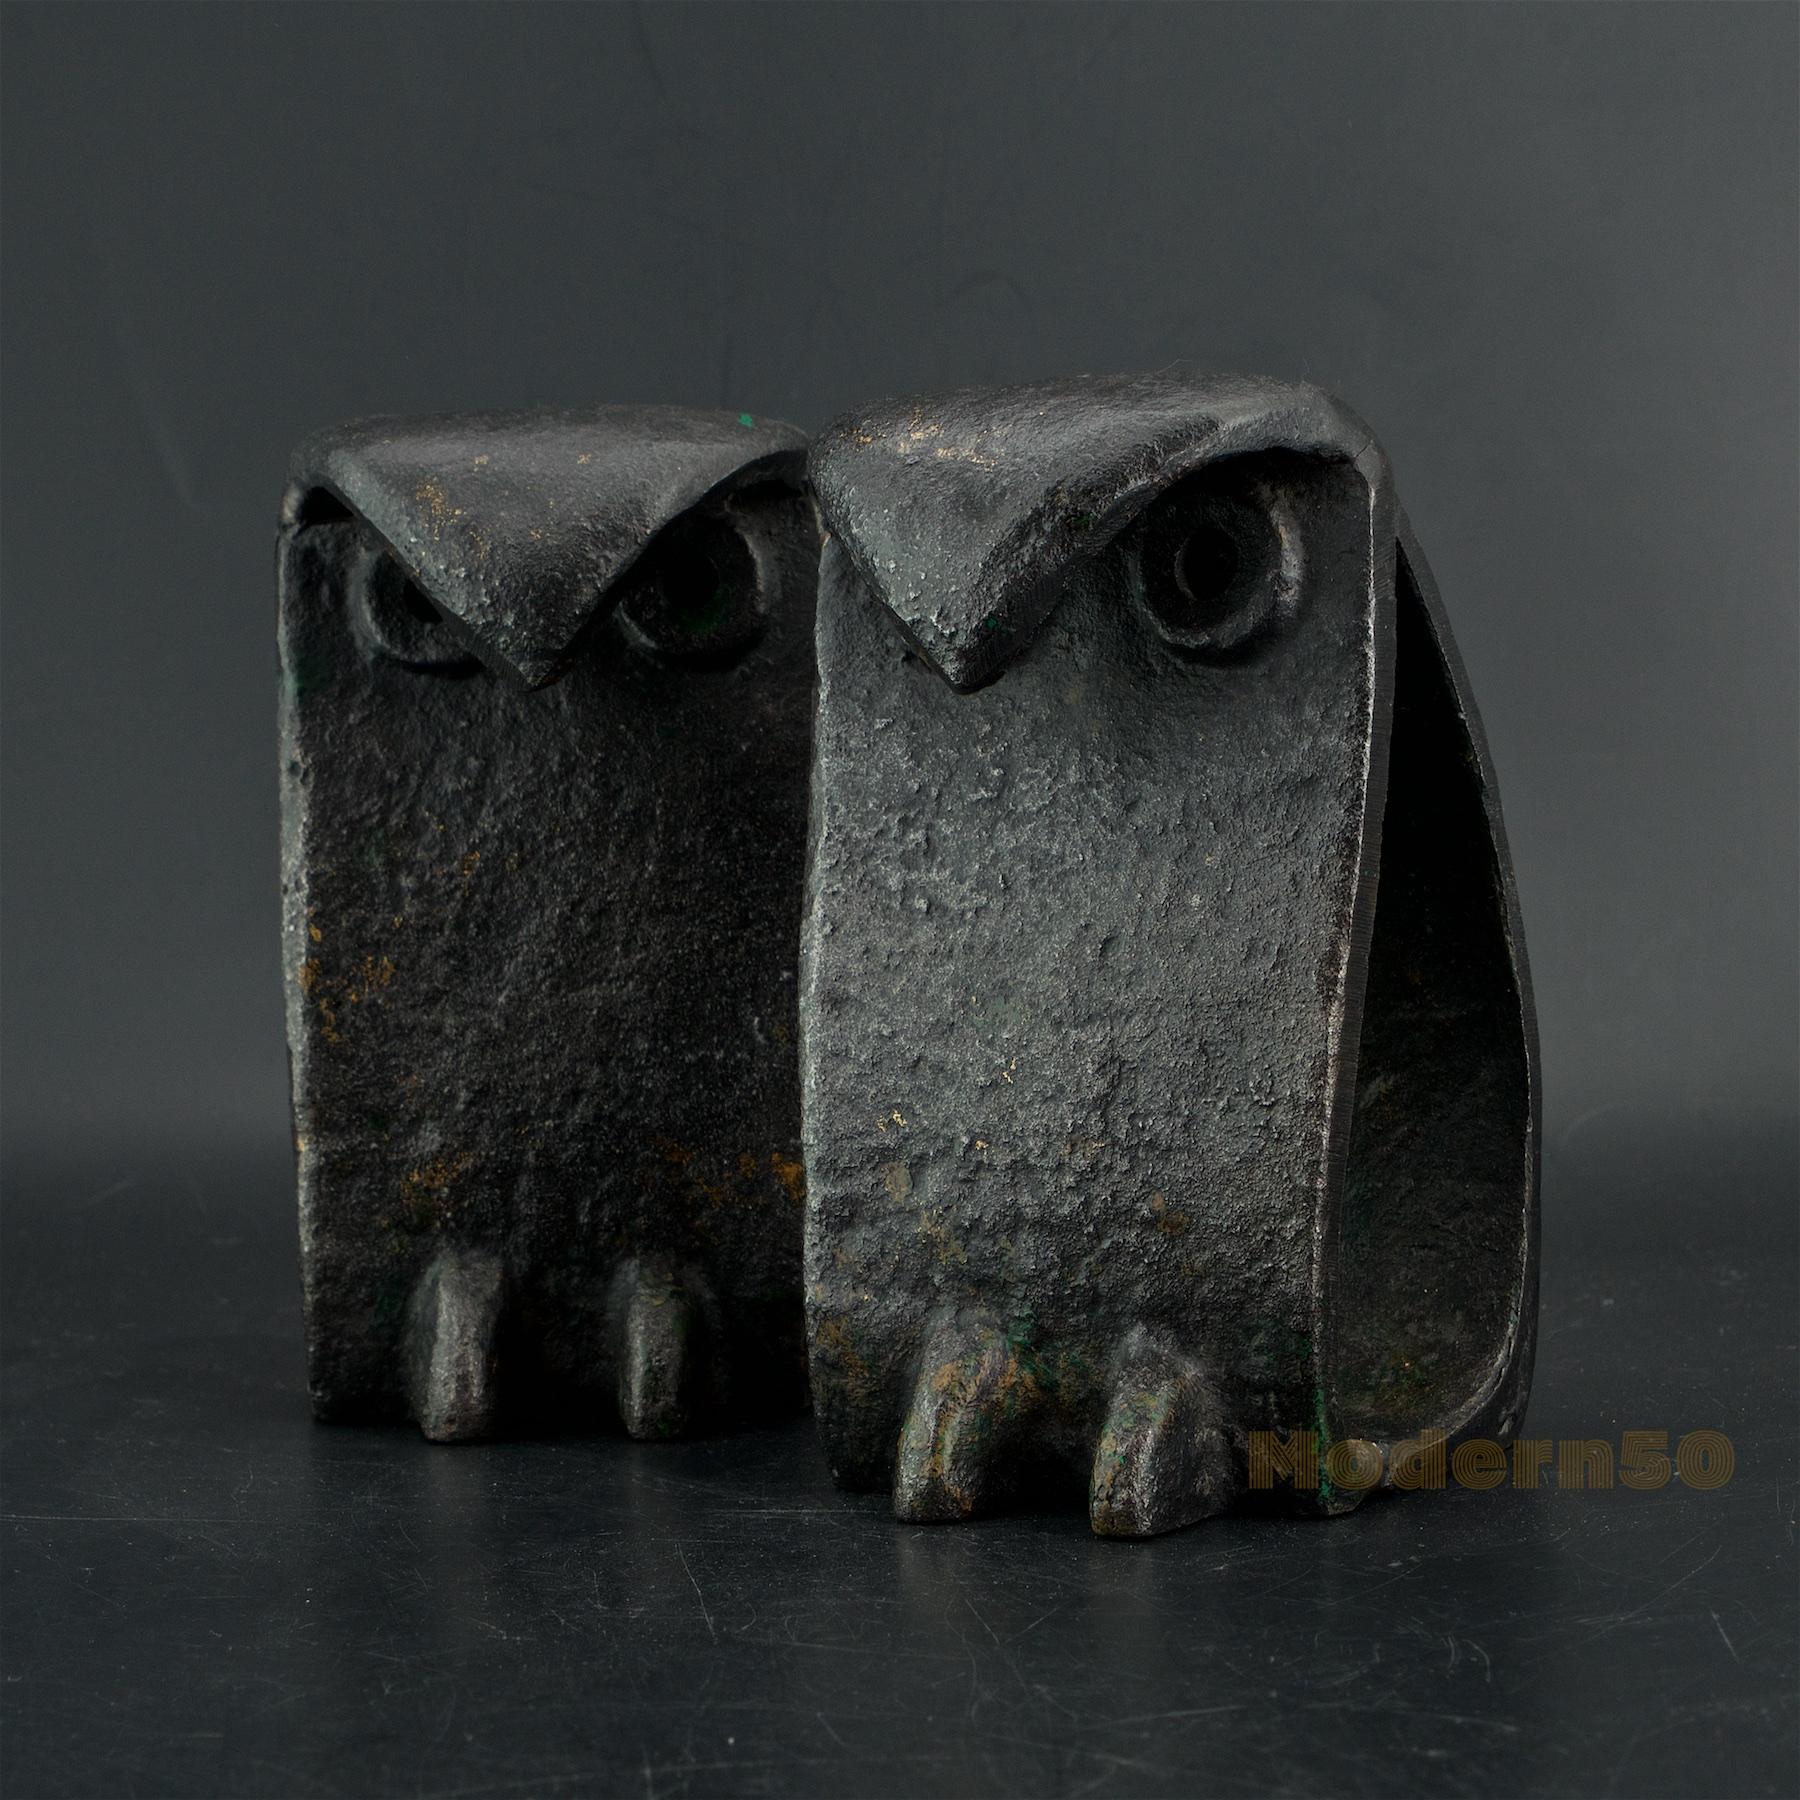 Pair of heavy welded metal abstract bird sculptures. Some remnants of greenish patina on steel. Made in Japan. Cleaned and waxed. Each bird is 6 inches High and weighs 3.35 lbs.